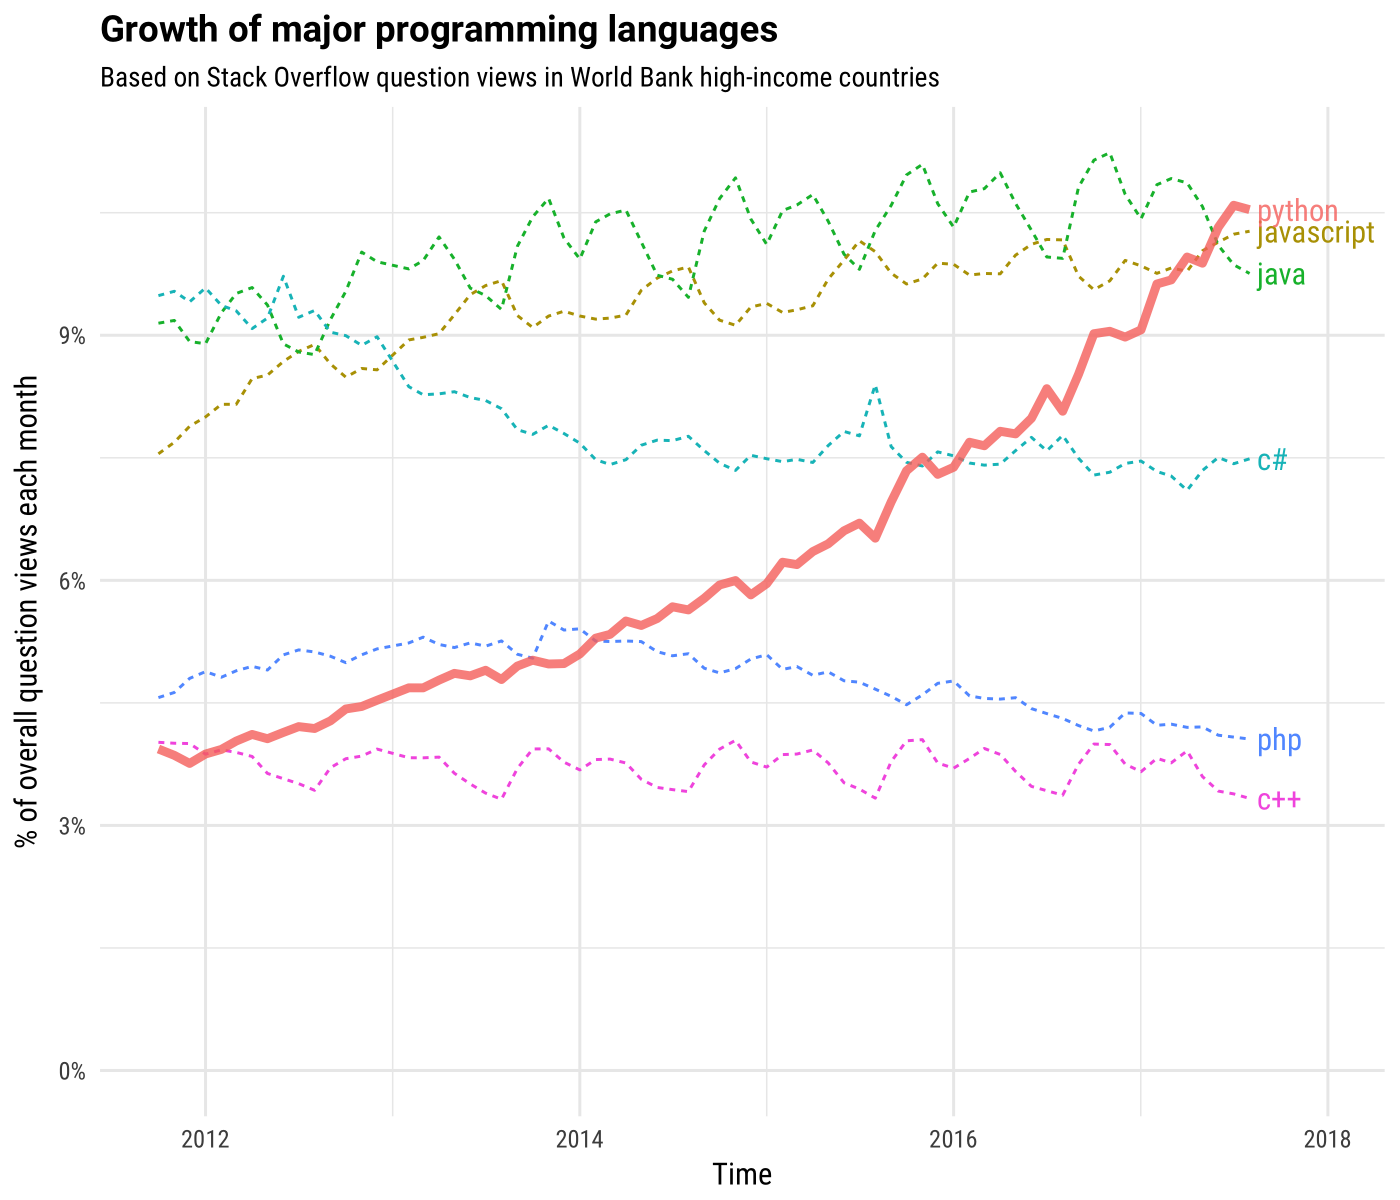 Growth of Popular Programming Languages Over a Six Year Period - Courtesy of StackOverflow